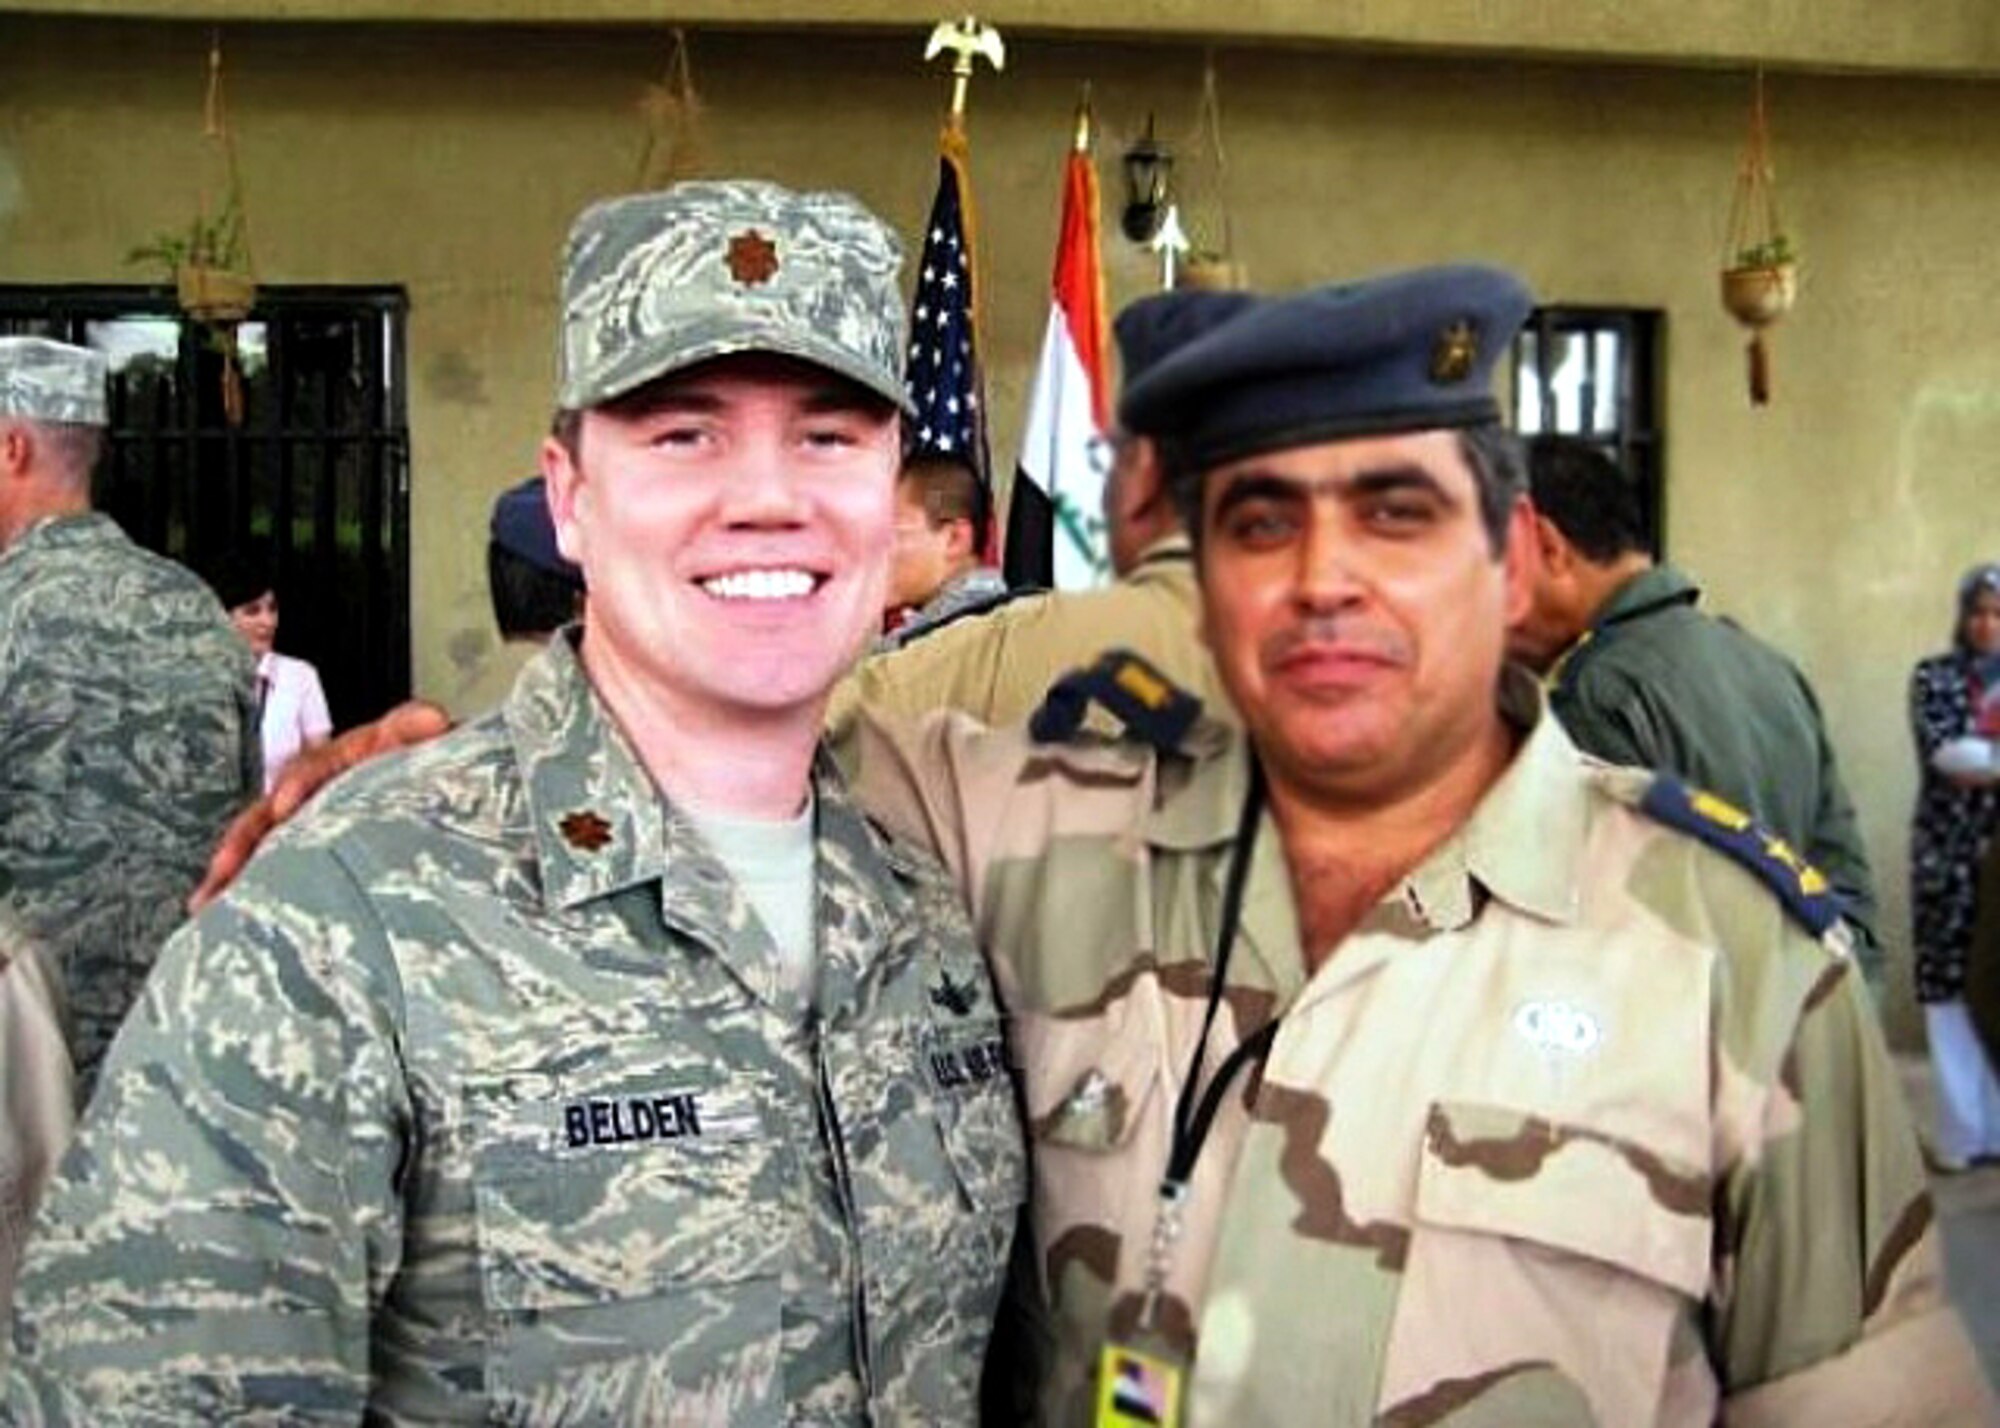 Maj. Dan Belden (left) served 18 months with the Coalition Air Force Training Team in Baghdad, Iraq, and assisted in the reconstruction of the Iraqi’s Air Force from the ground up. He was awarded the Bronze Star Medal for his efforts. (Courtesy photo)